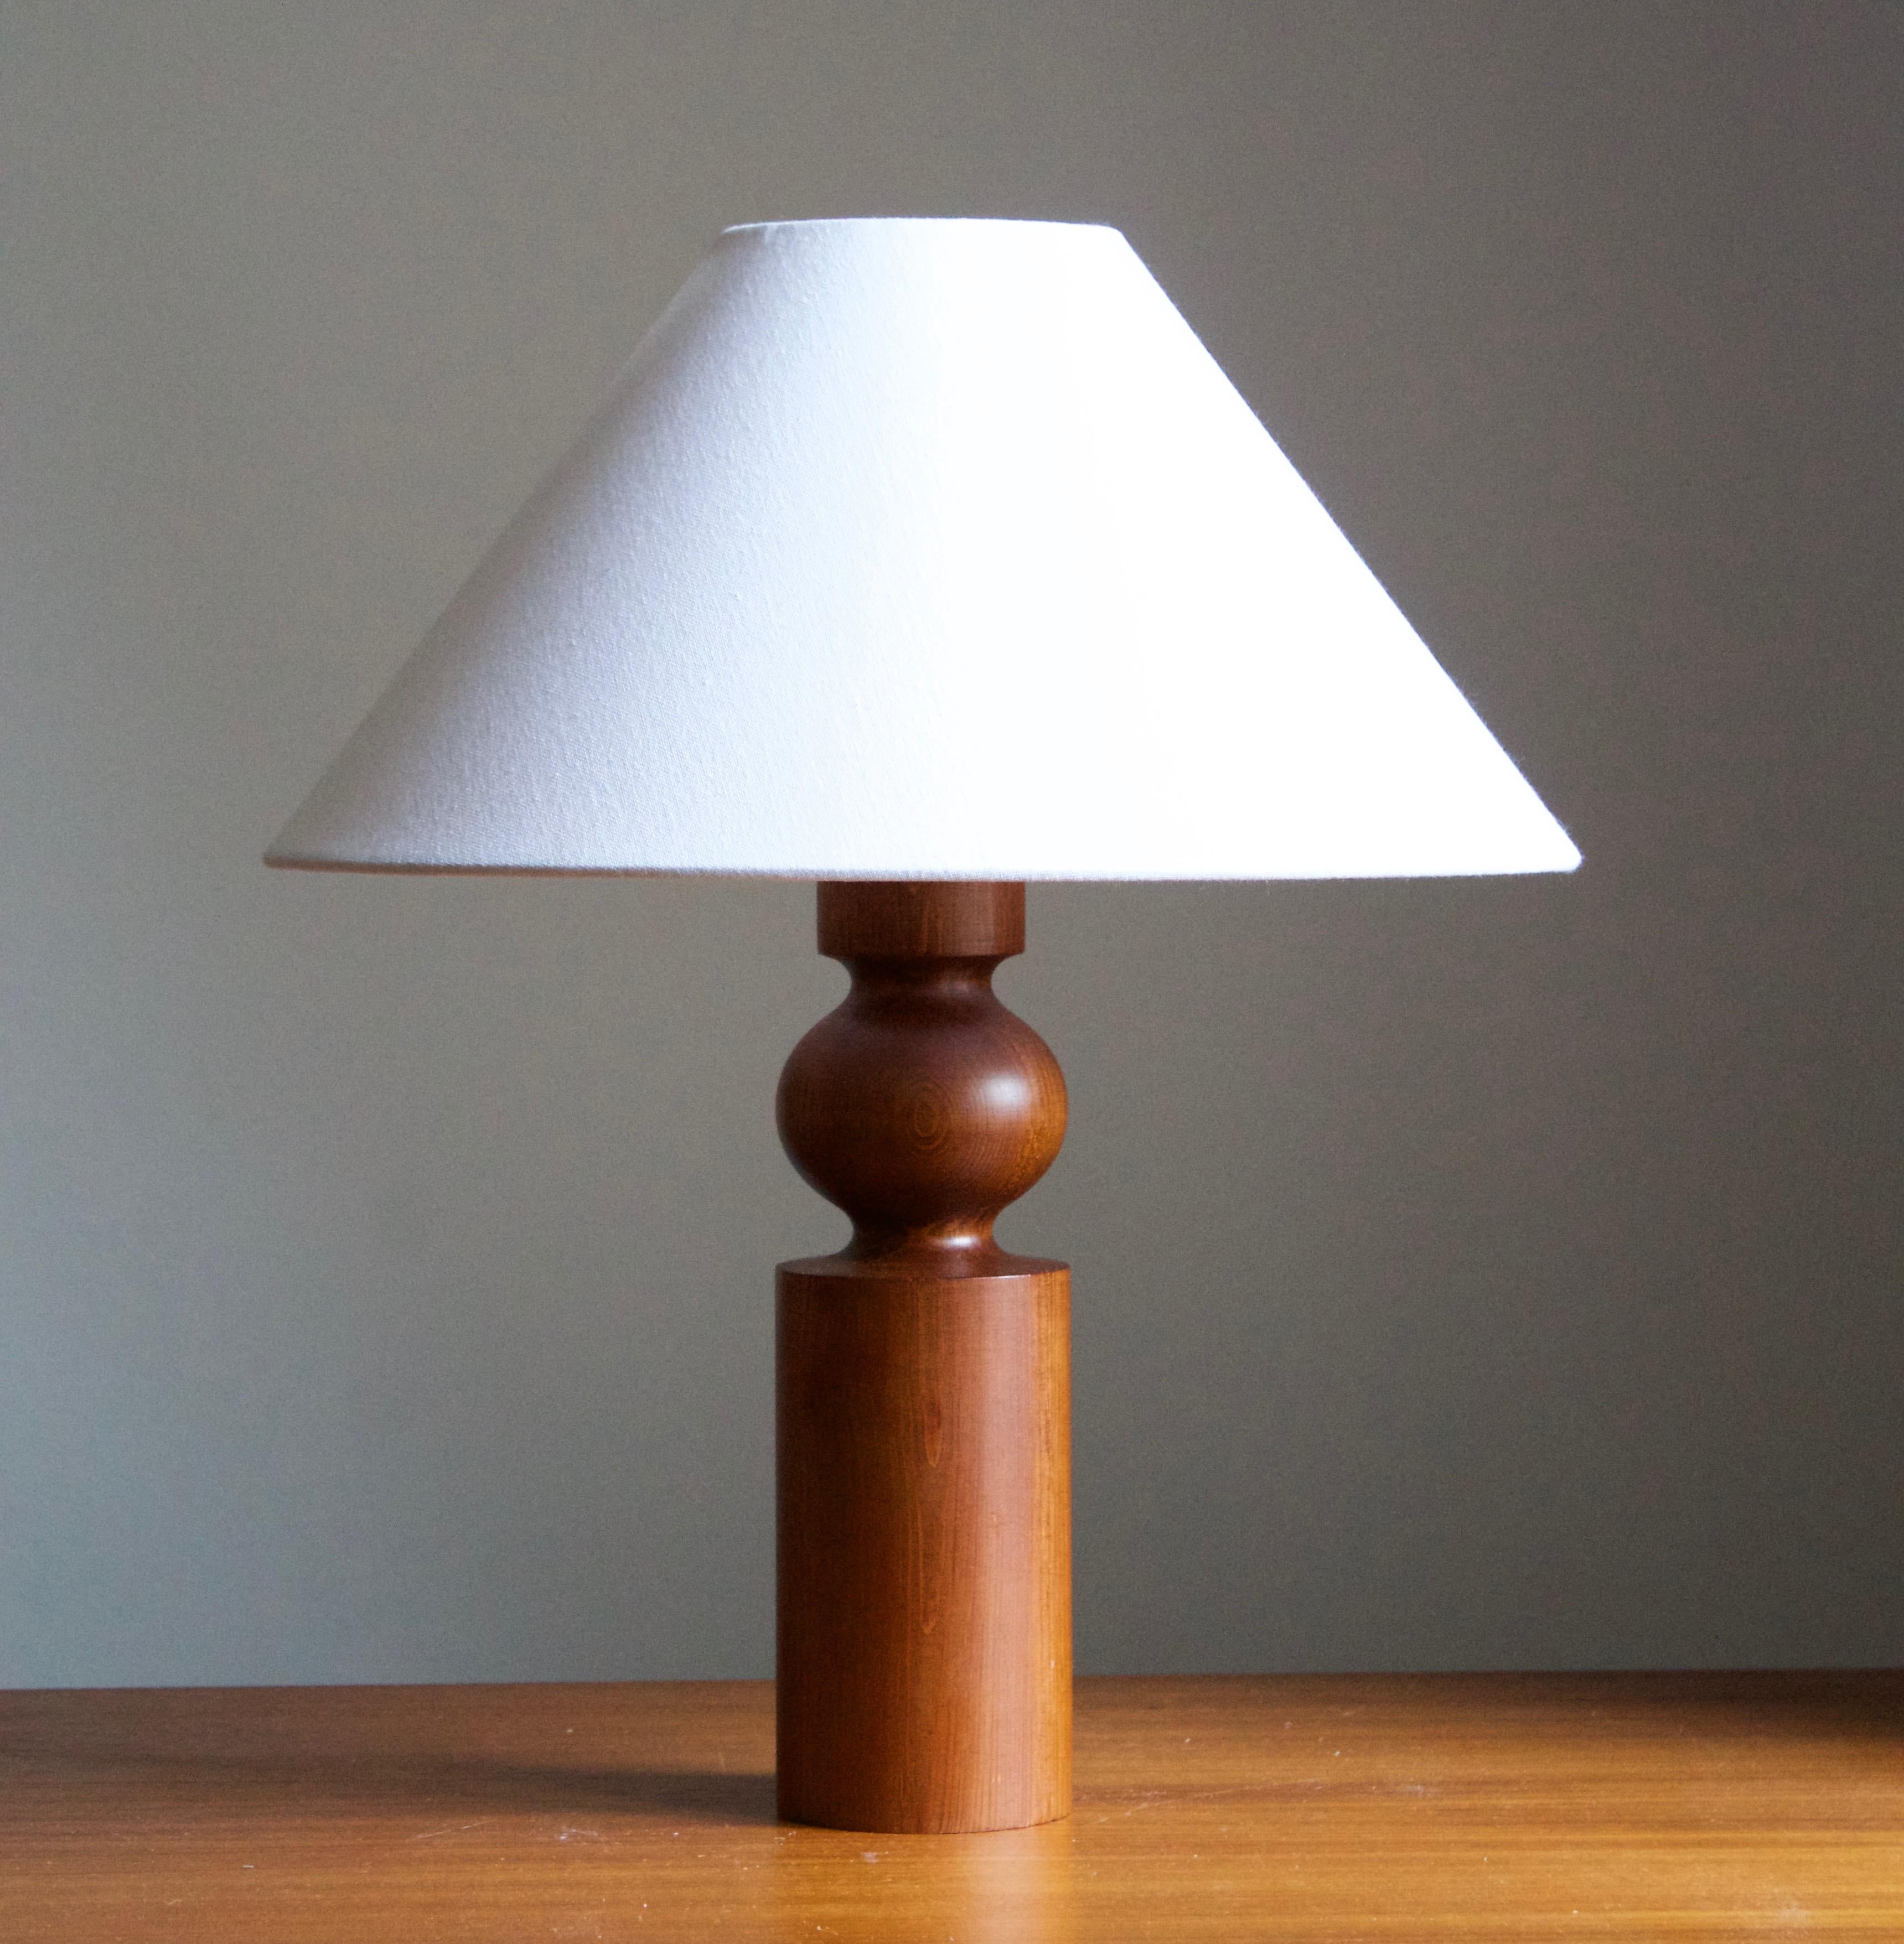 A solid pine table lamp. Designed by Uno Kristiansson, for Luxus, Sweden, 1960s.

Stated dimensions exclude lampshade, height includes socket. Sold without lampshade.

Other designers of the period include Axel Einar Hjorth, Roland Wilhelmsson,